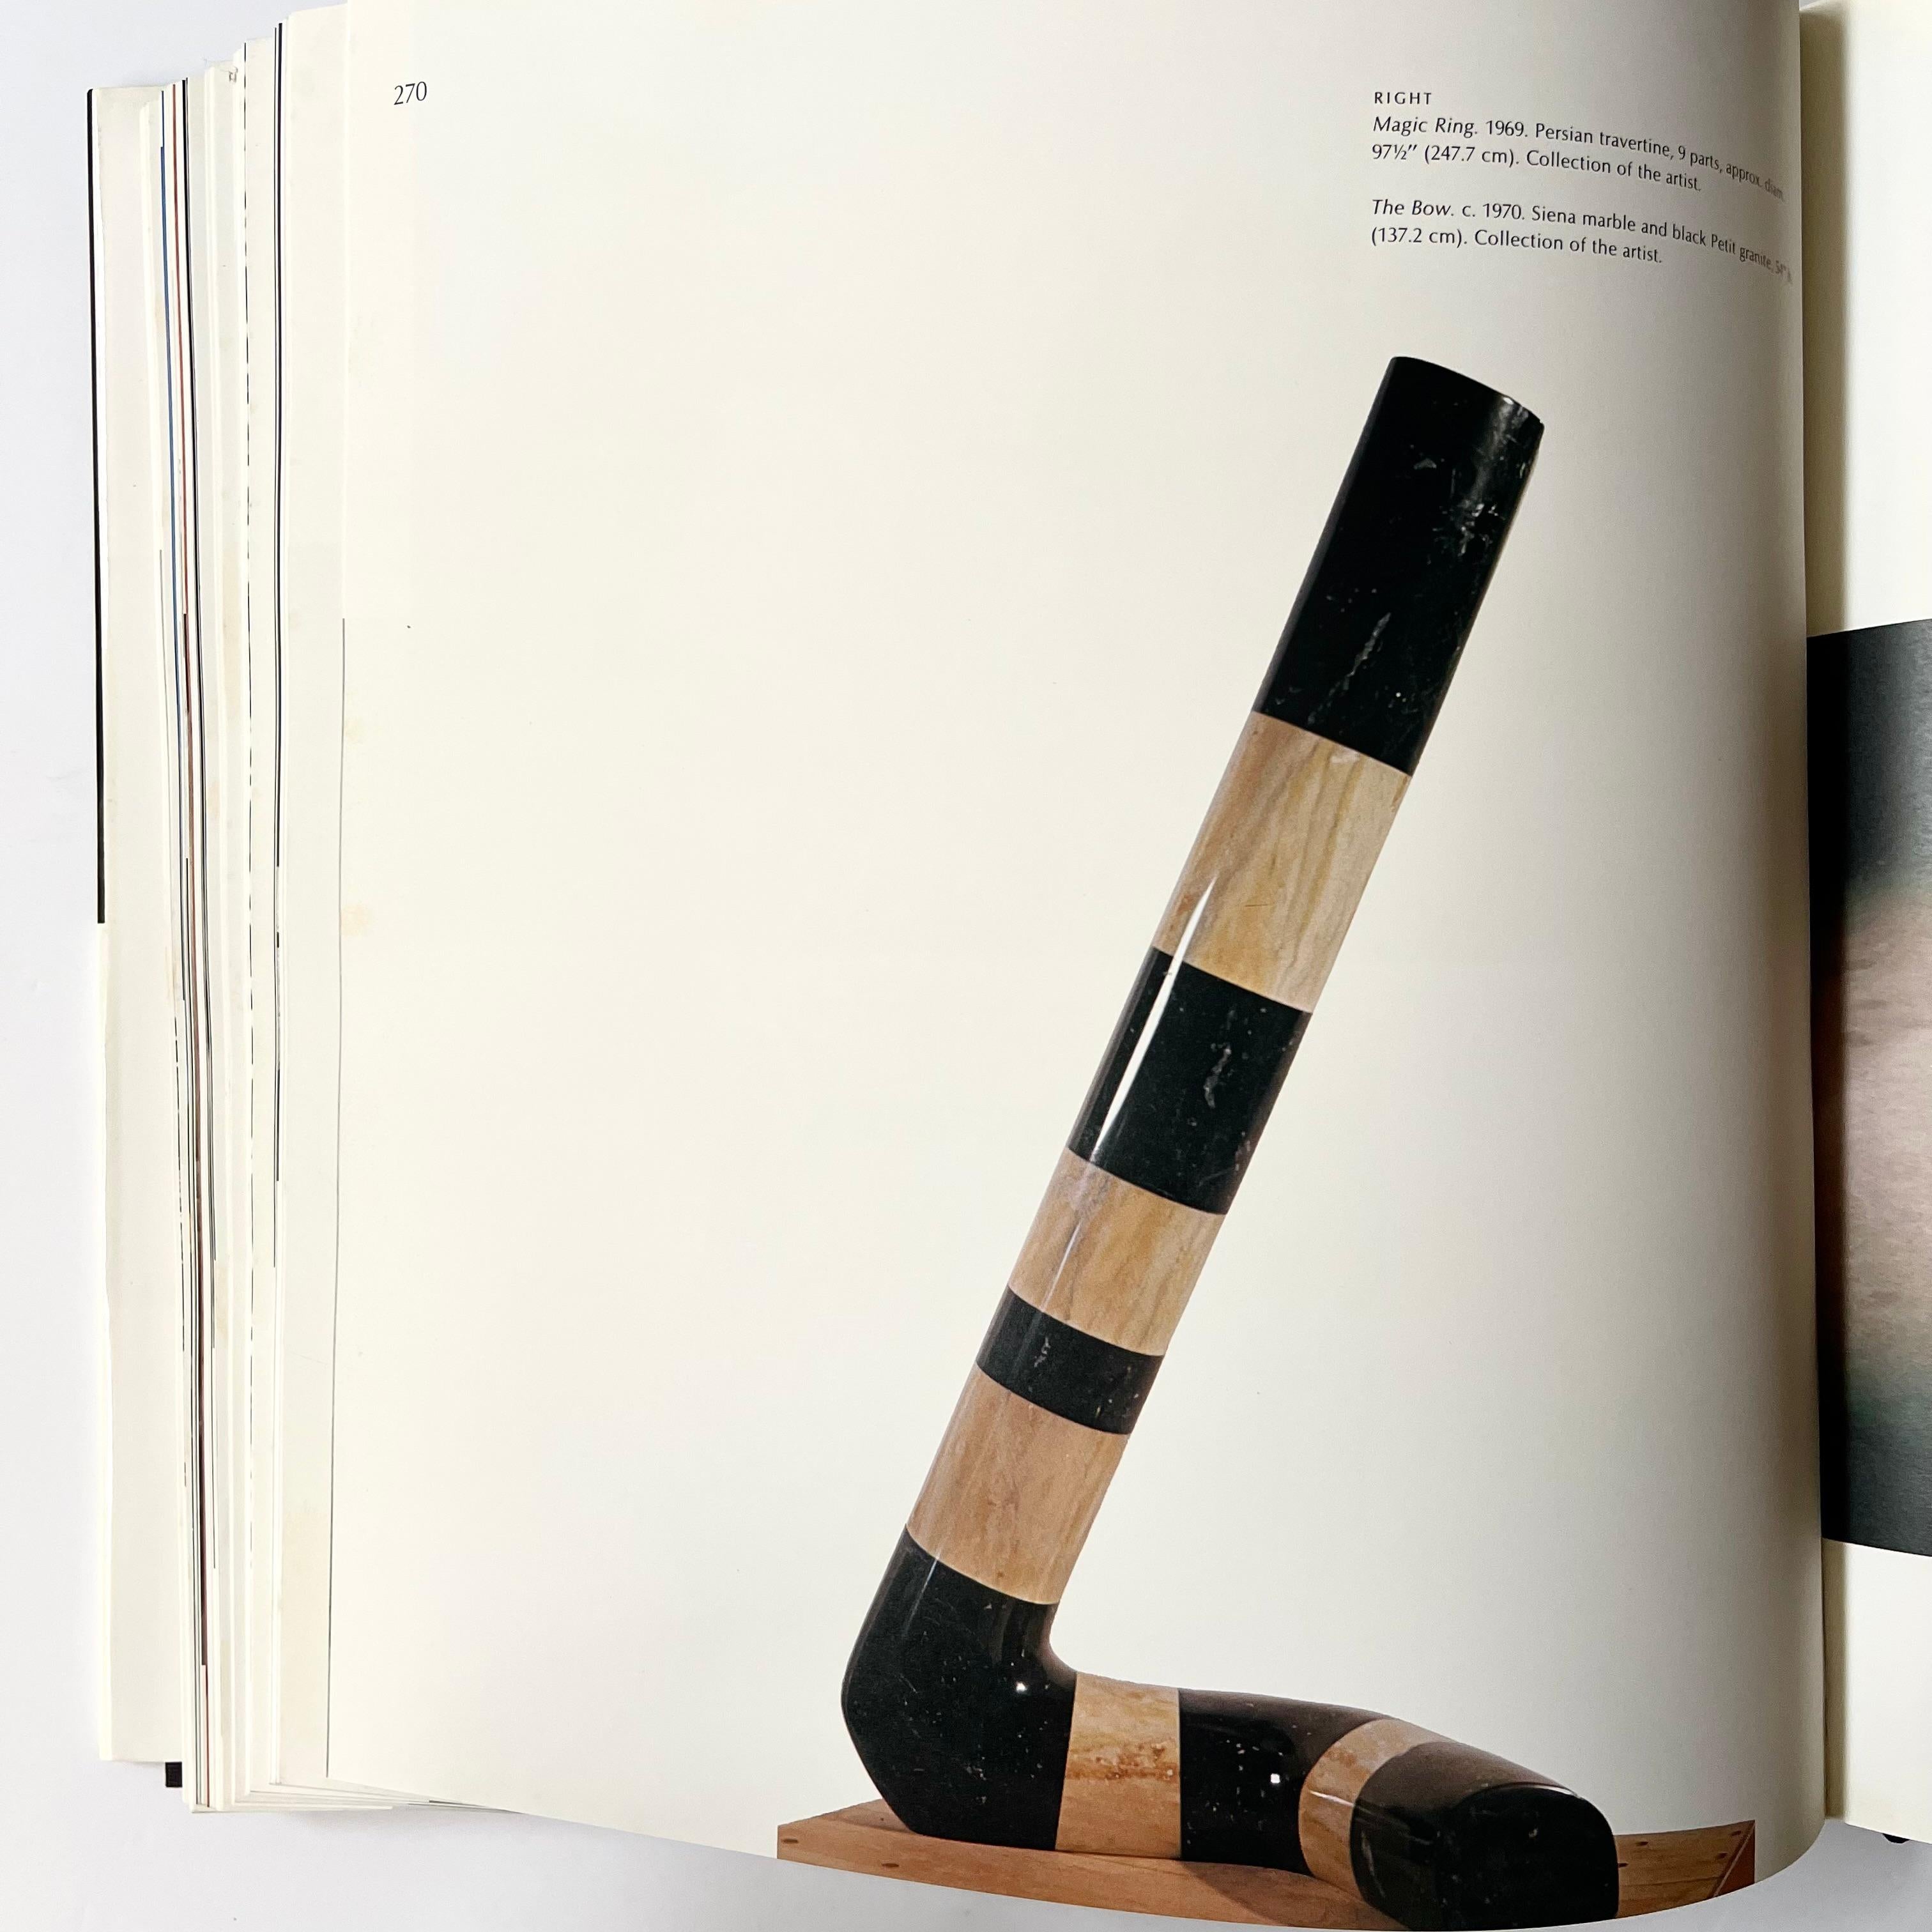 1st edition published by Thames and Hudson 1979. Hardcover
This sizeable monograph documents the remarkable life and career of artist and designer, Isamu Noguchi. From the ups and Downs of his early artistic career to the universal success of his